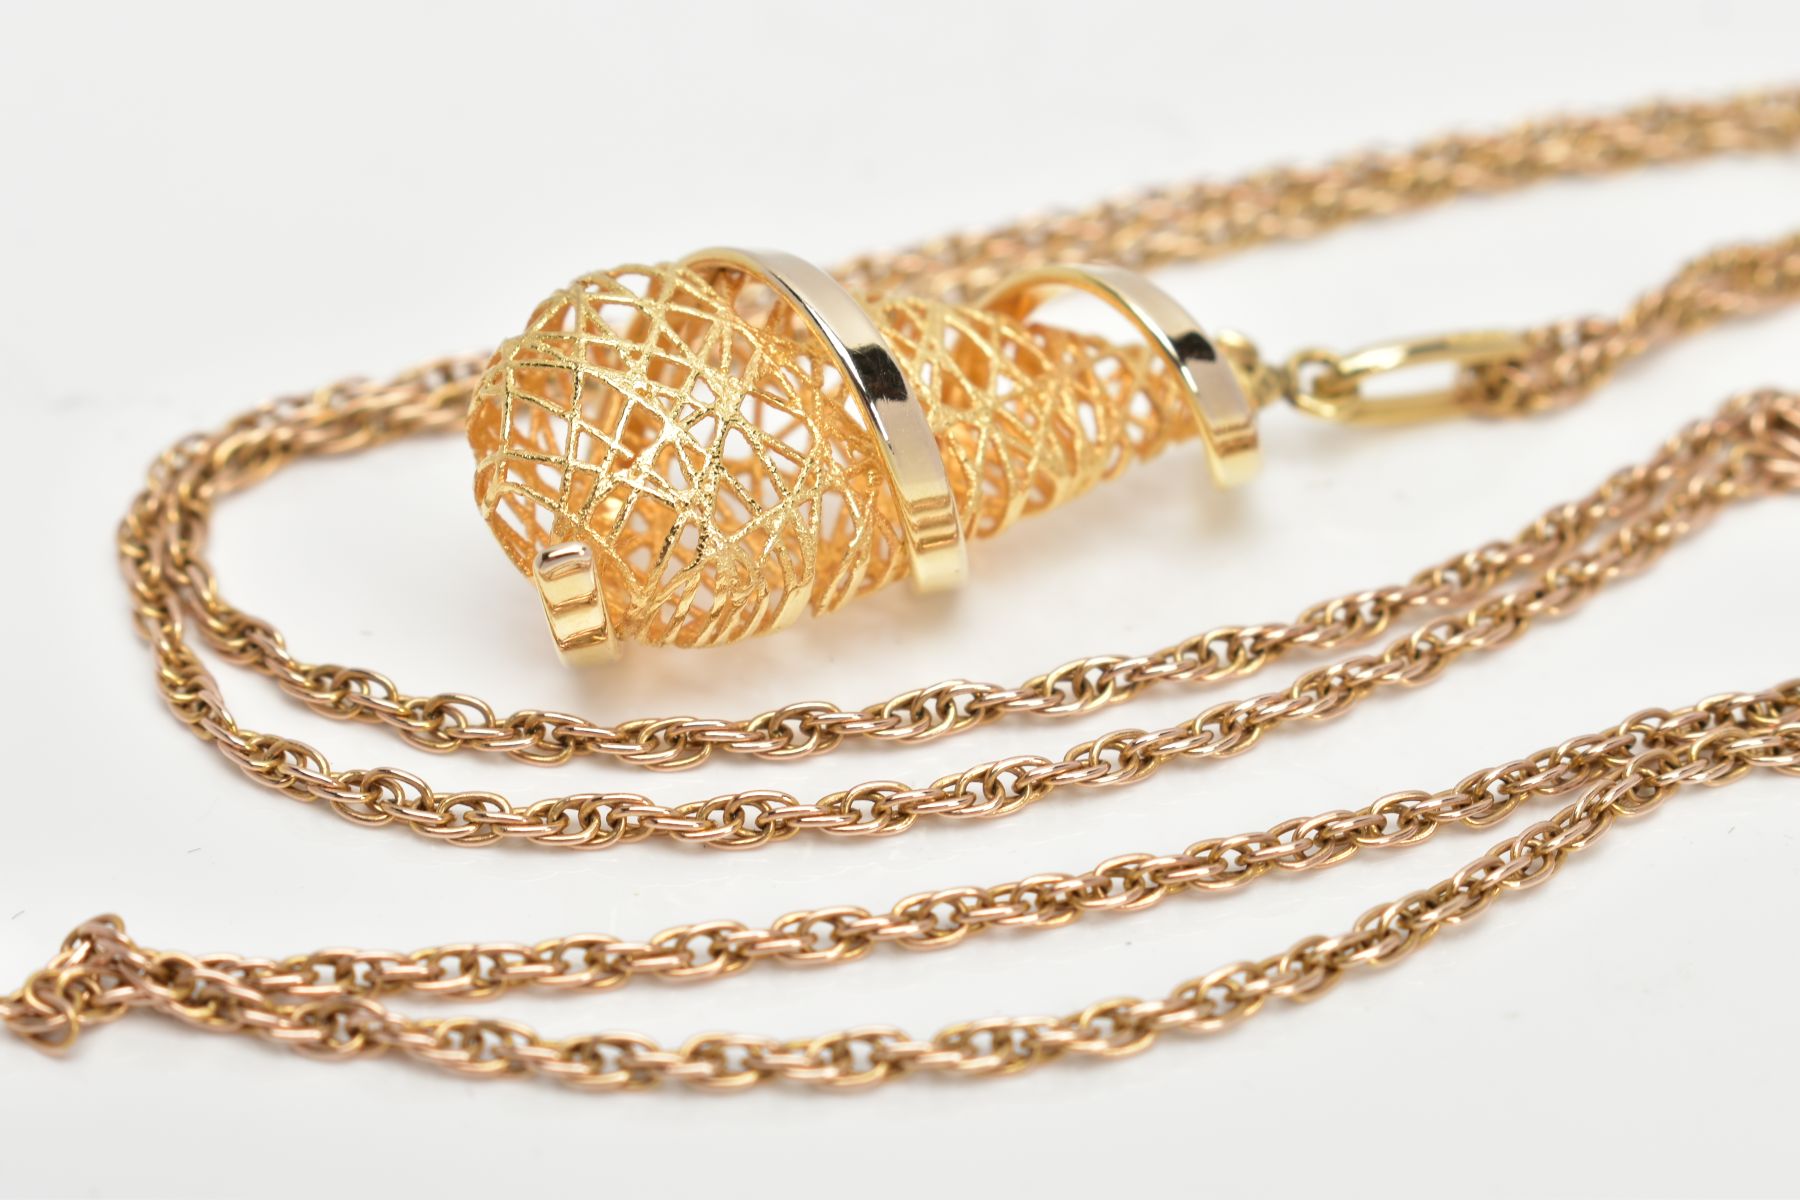 A 9CT GOLD PENDANT NECKLACE, the pendant of an openwork tear drop shape, with a plain polished - Image 3 of 3